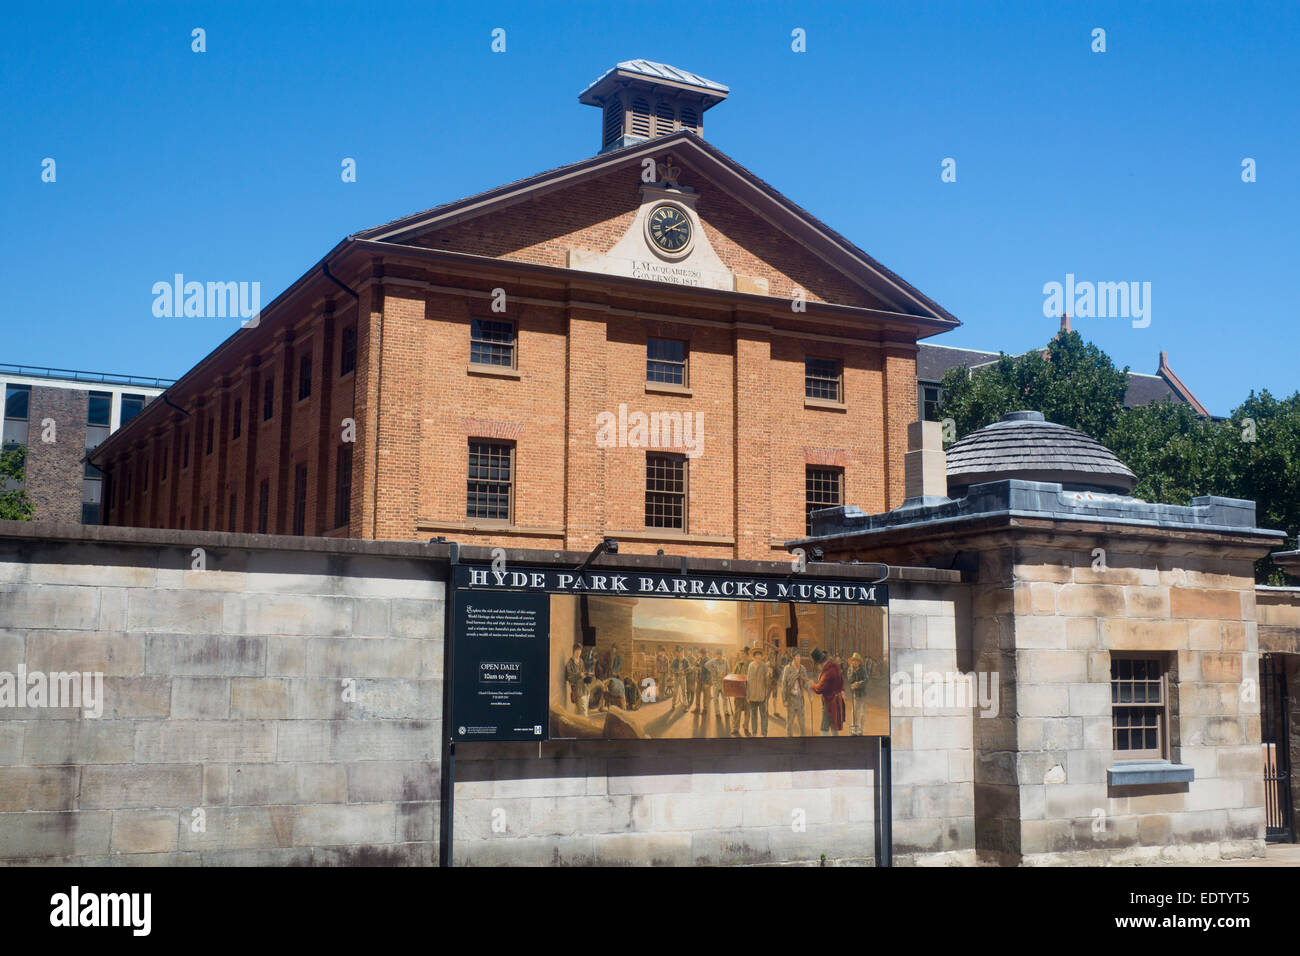 Hyde Park Barracks Convict era Early Australian architecture built 1817 Sydney New South Wales NSW Australia Sign on wall outsid Stock Photo